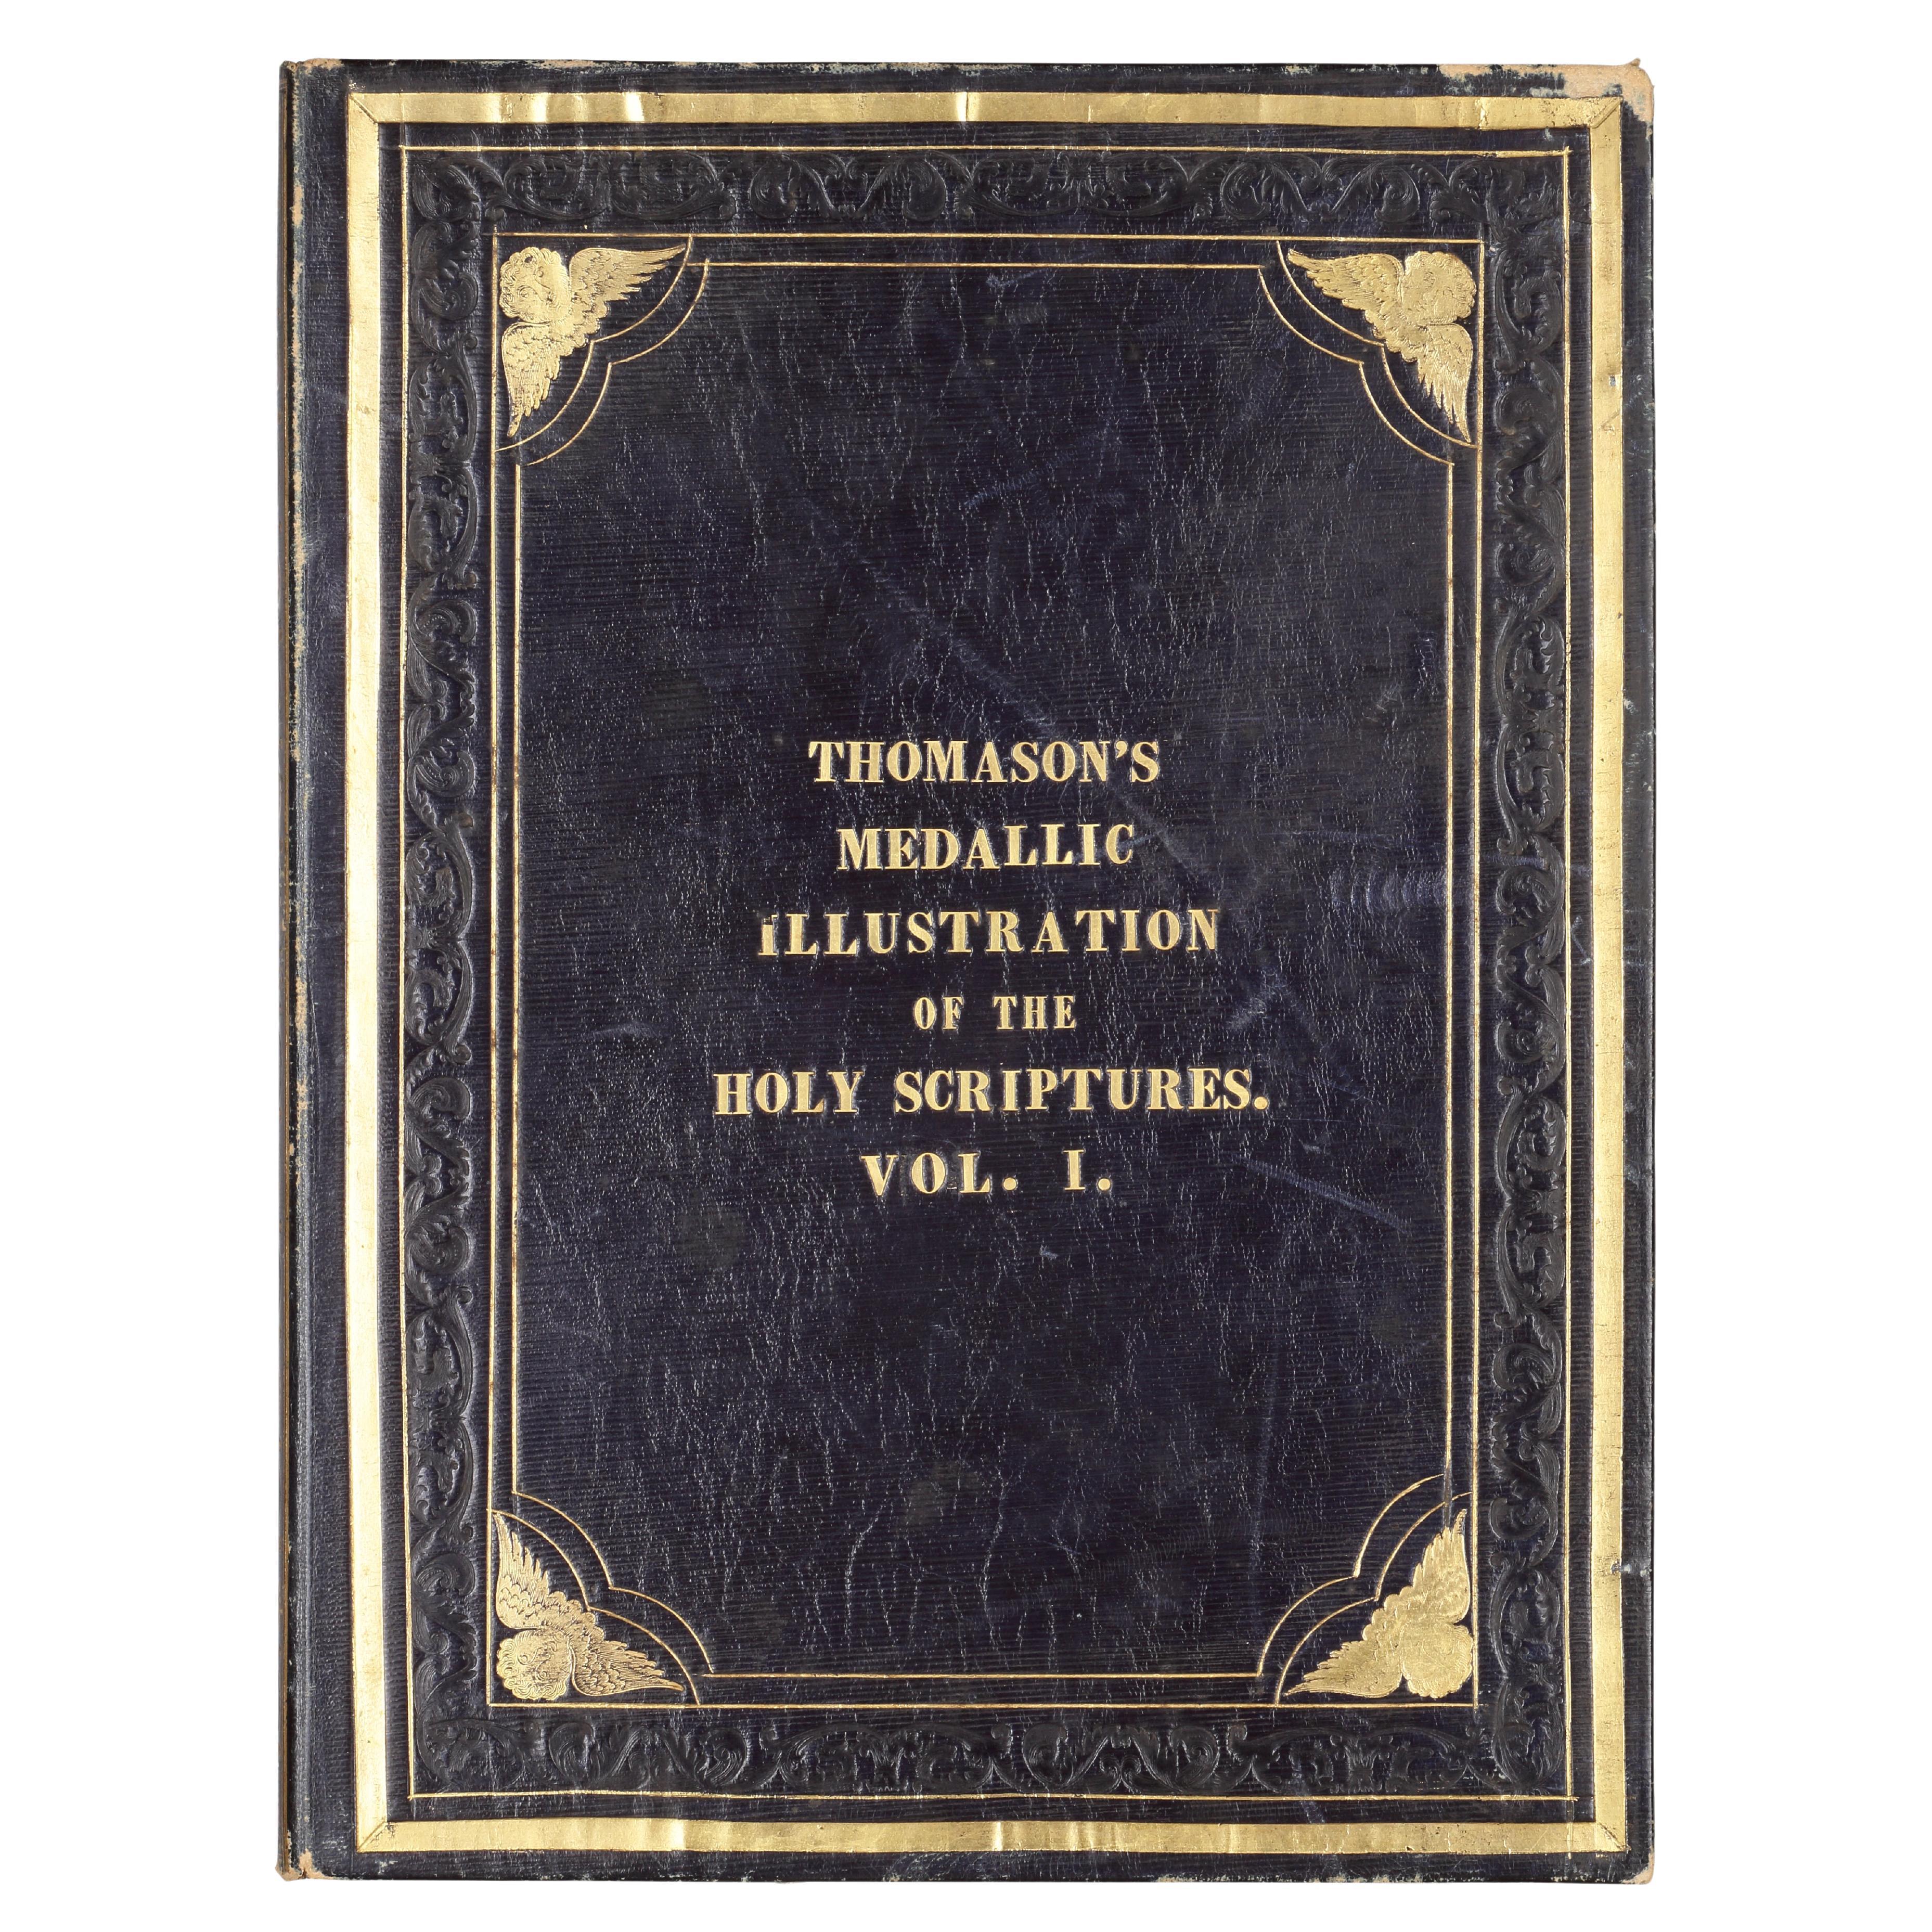 The ‘Medallic Illustrations of The Holy Scriptures’ by Sir Edward Thomason For Sale